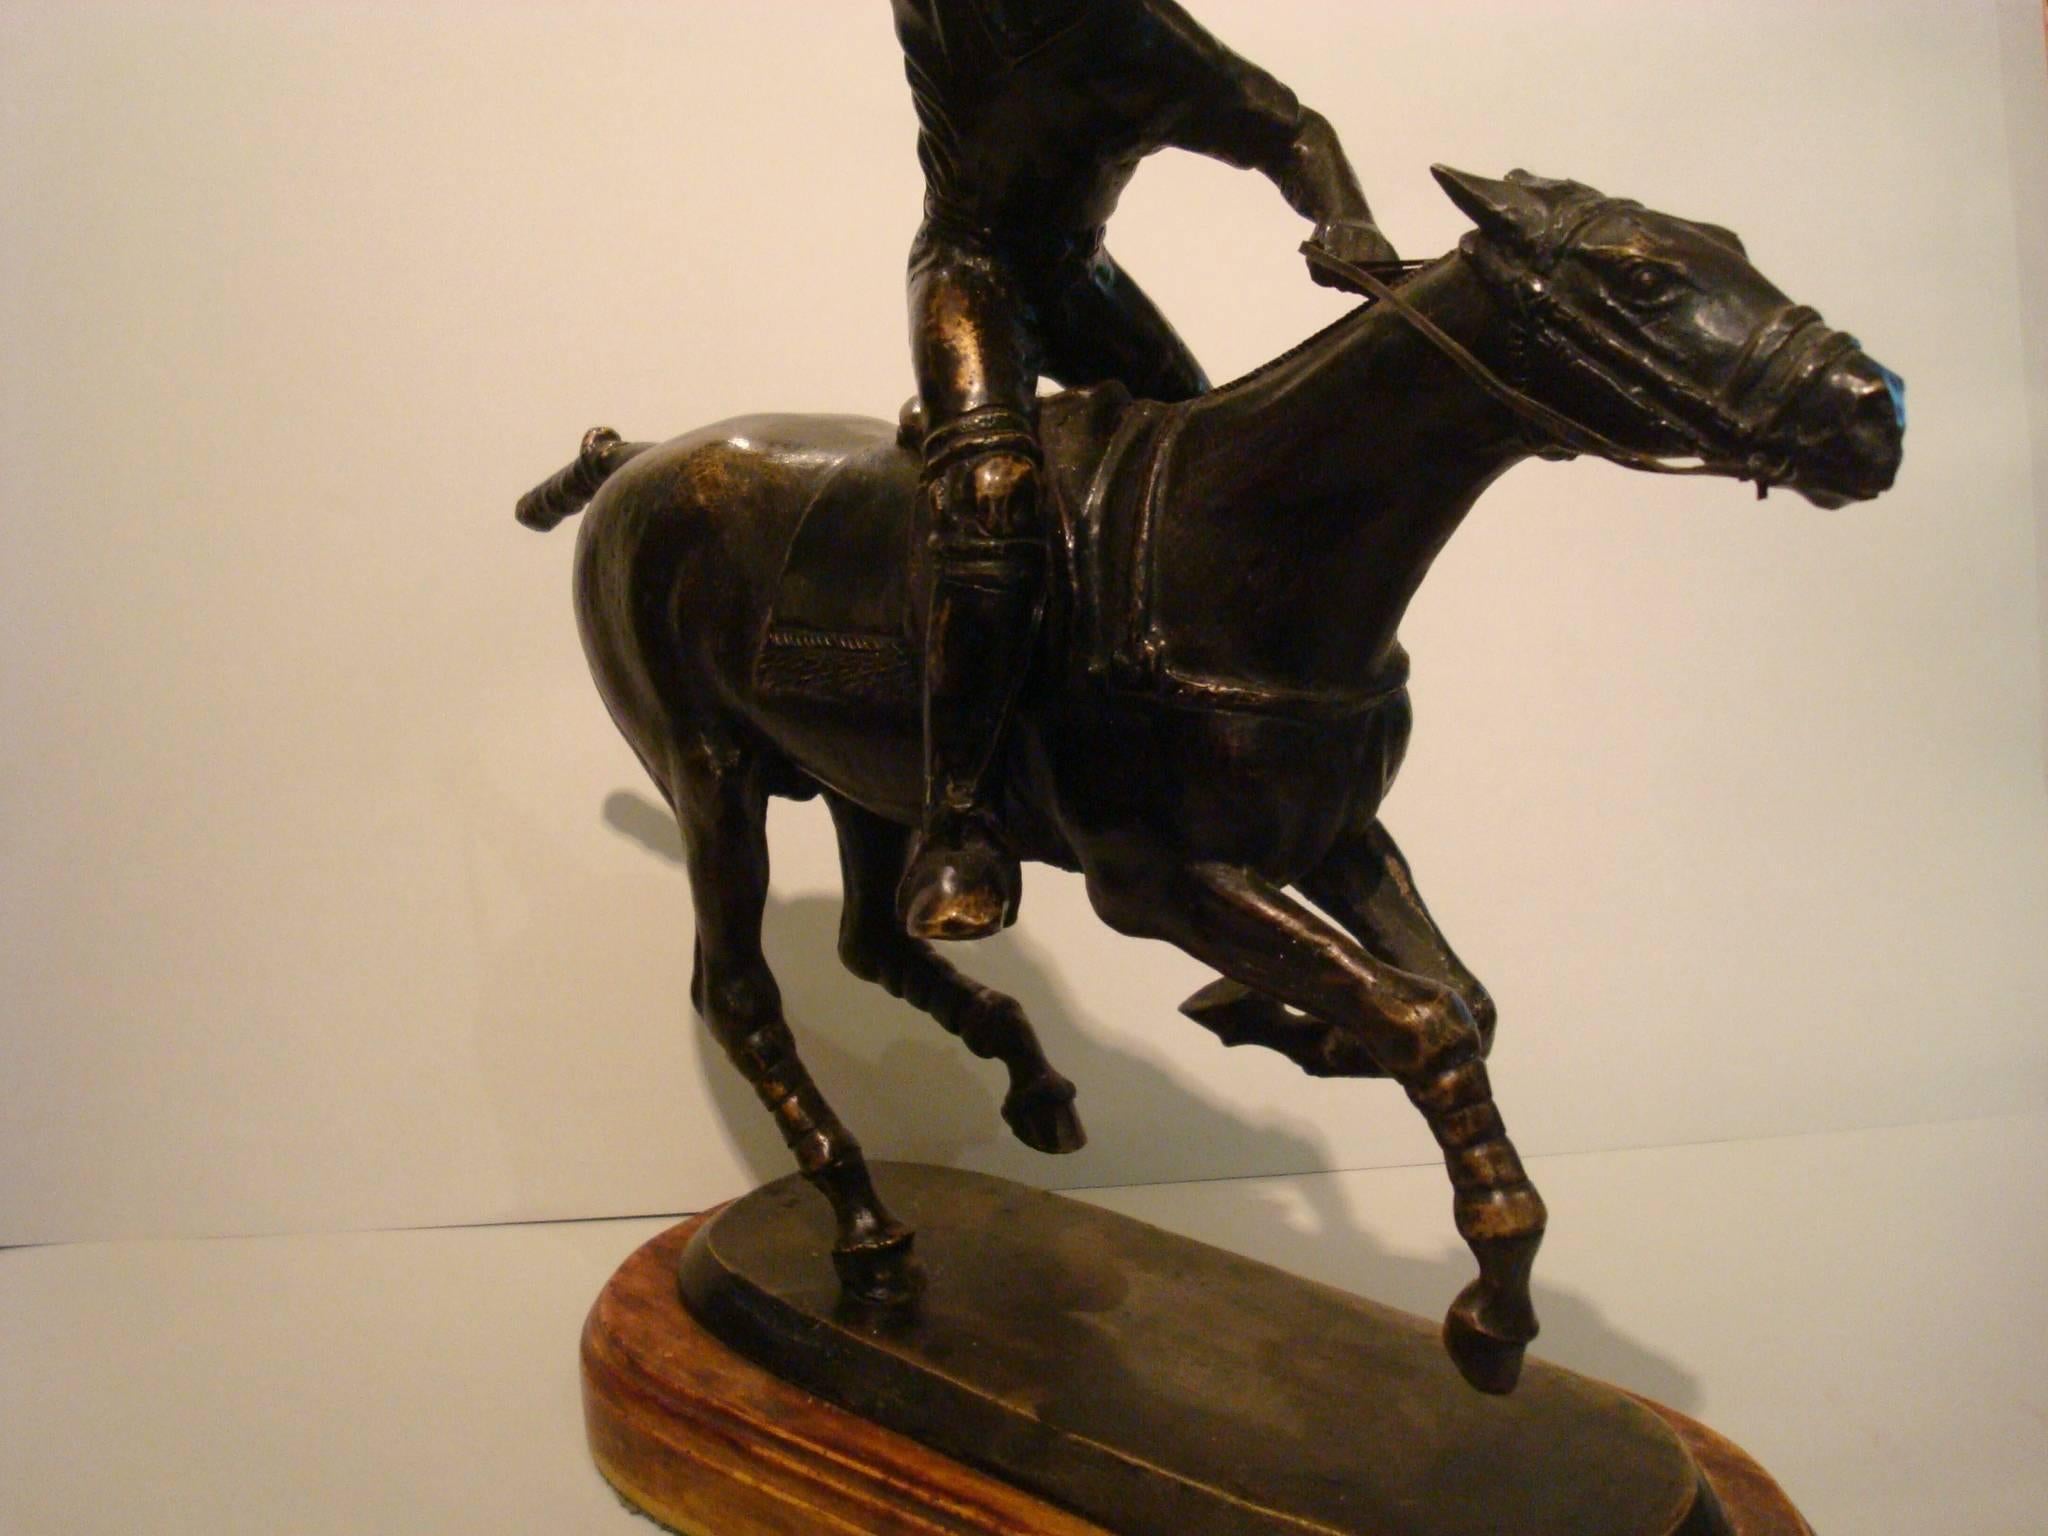 Very nice bronze sculpture of a Polo player over its horse in a match movement.
High detailed. Perfect for a trophy. The figure is mounted over a resin base, that looks like wood.